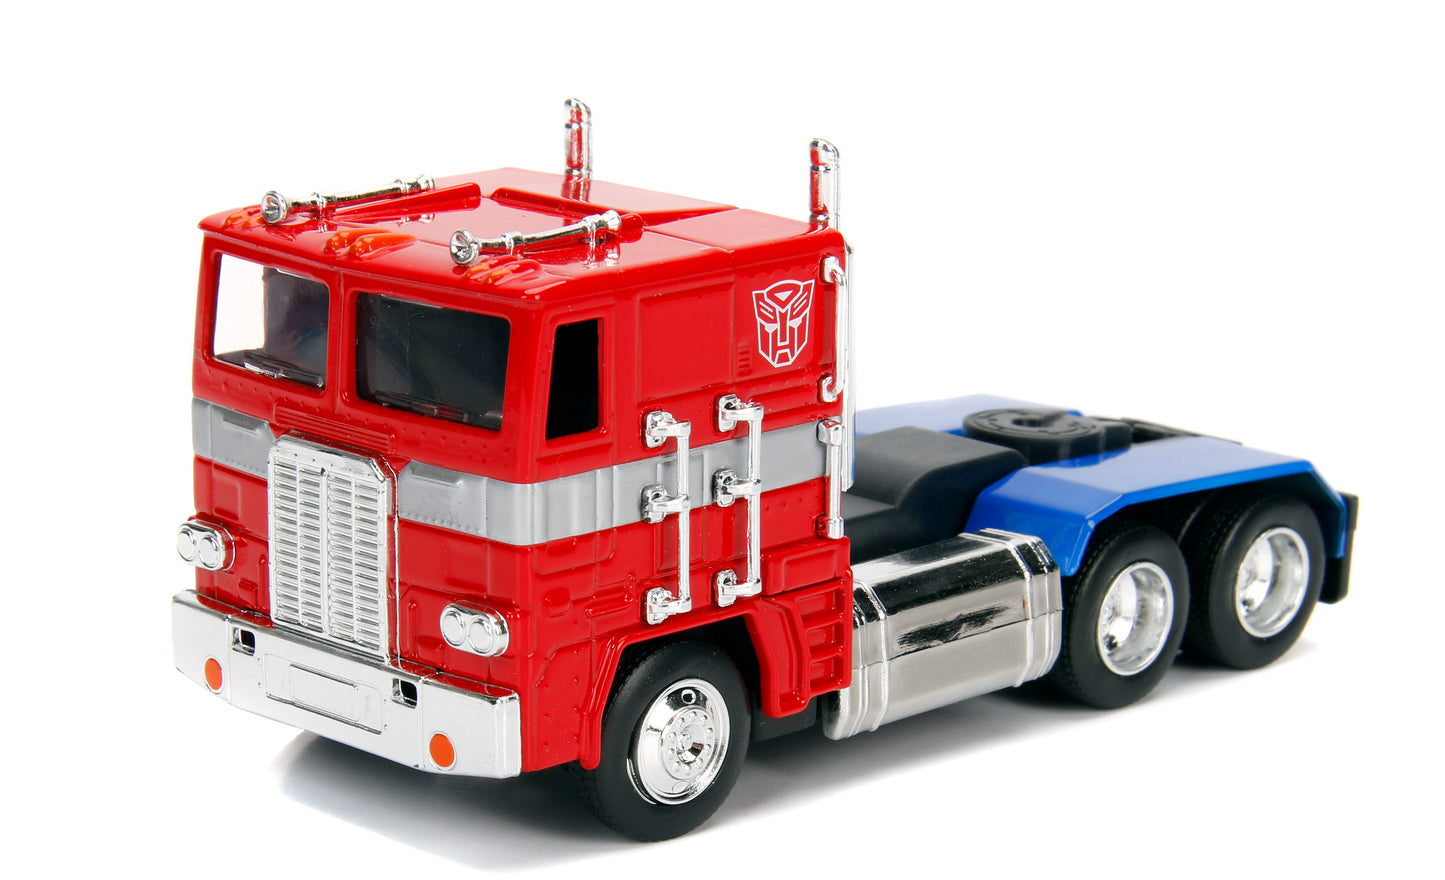 1:32 Transformers Optimus Prime 3 pack (this is a preorder)